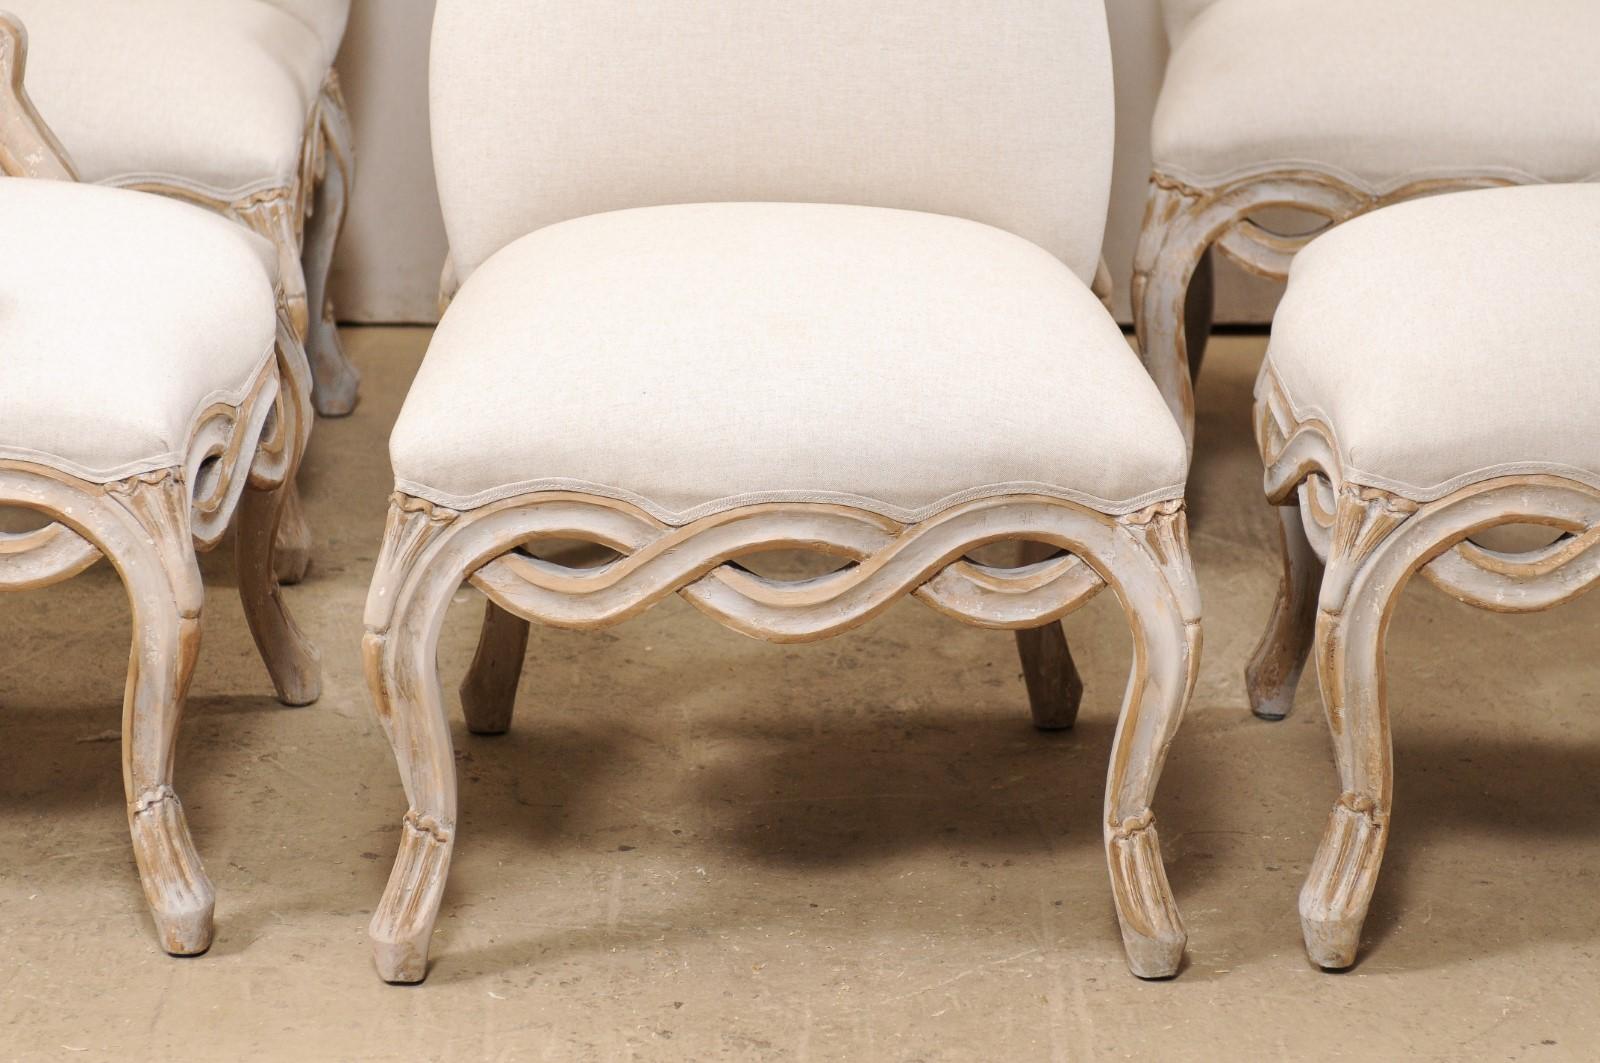 American Set of 8 Venetian-Style Upholstered Dining Chairs w/ Pierce-Carved Ribbon Skirts